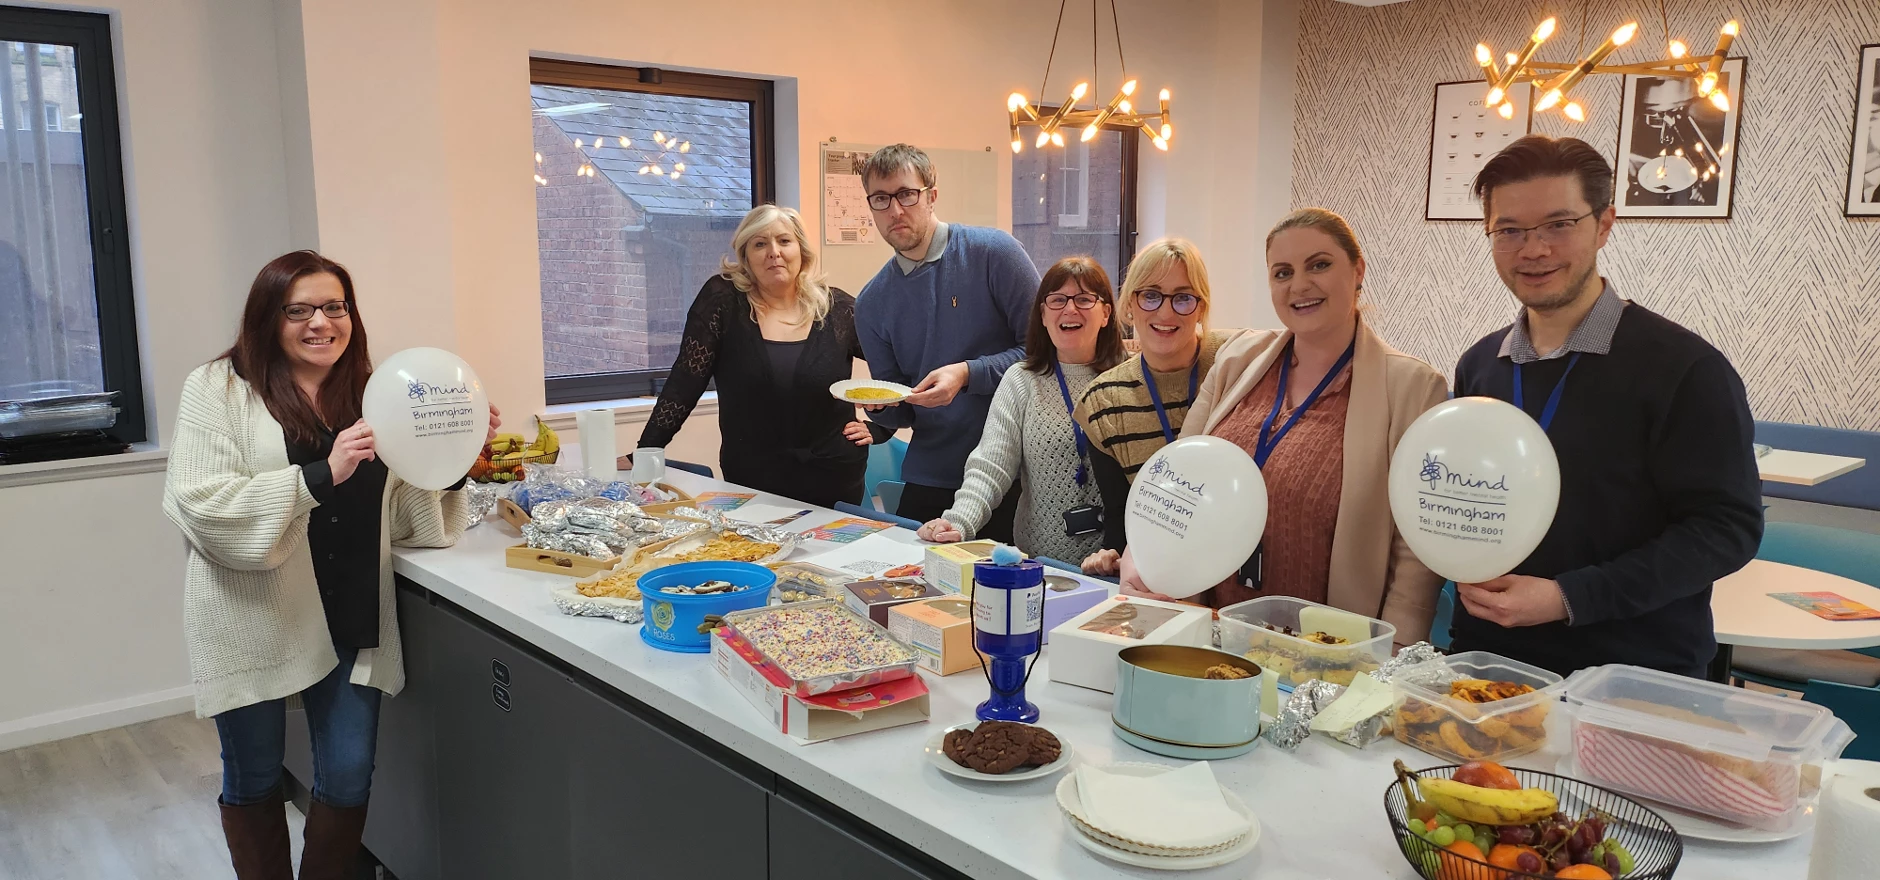 Fisher German's Birmingham office held a fundraising bake sale to celebrate the announcement